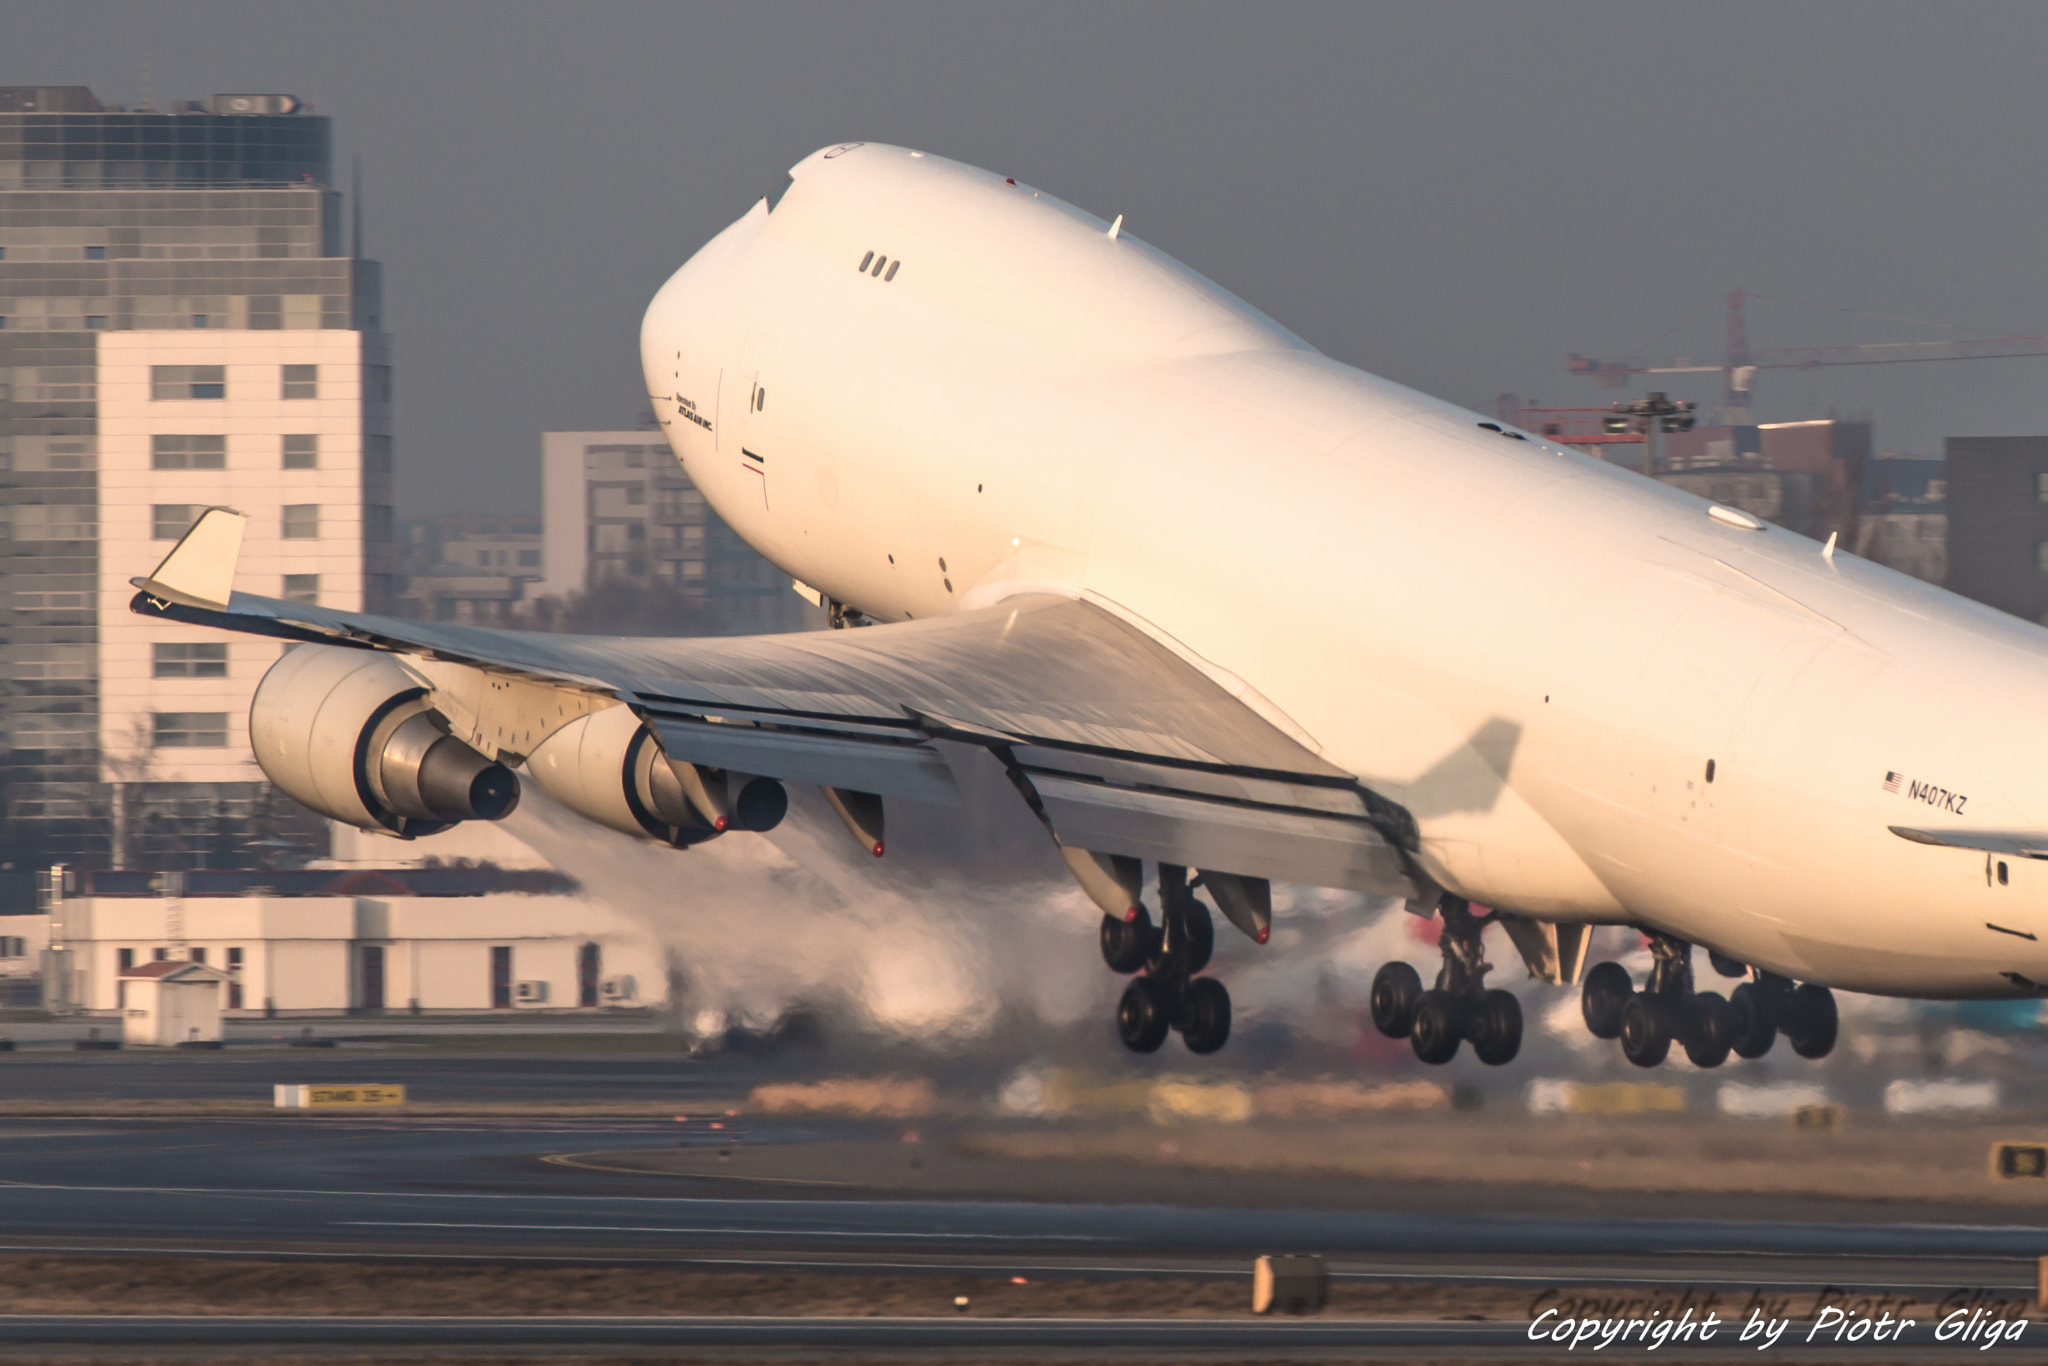 Sony a99 II sample photo. Boeing 747-400 photography